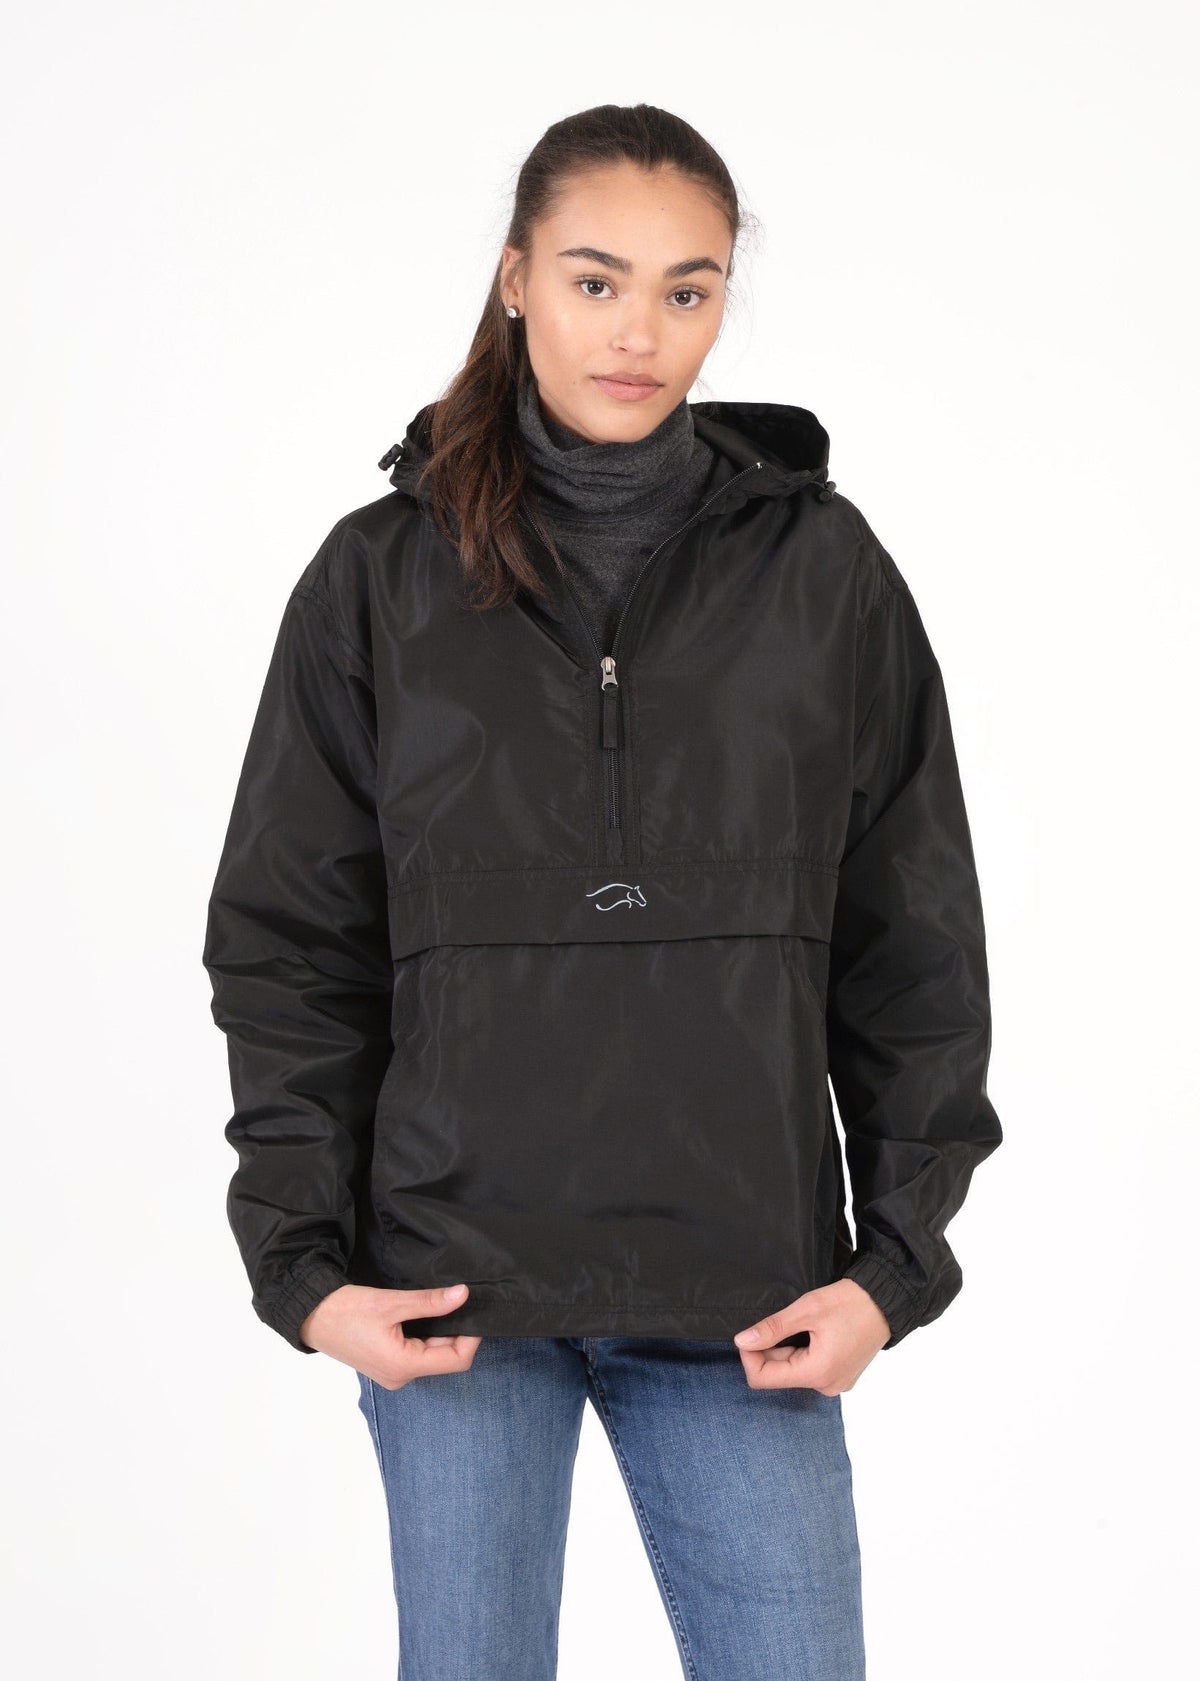 Chestnut Bay rain coat XS / Black Chestnut Bay Rainy Day Pullover equestrian team apparel online tack store mobile tack store custom farm apparel custom show stable clothing equestrian lifestyle horse show clothing riding clothes horses equestrian tack store